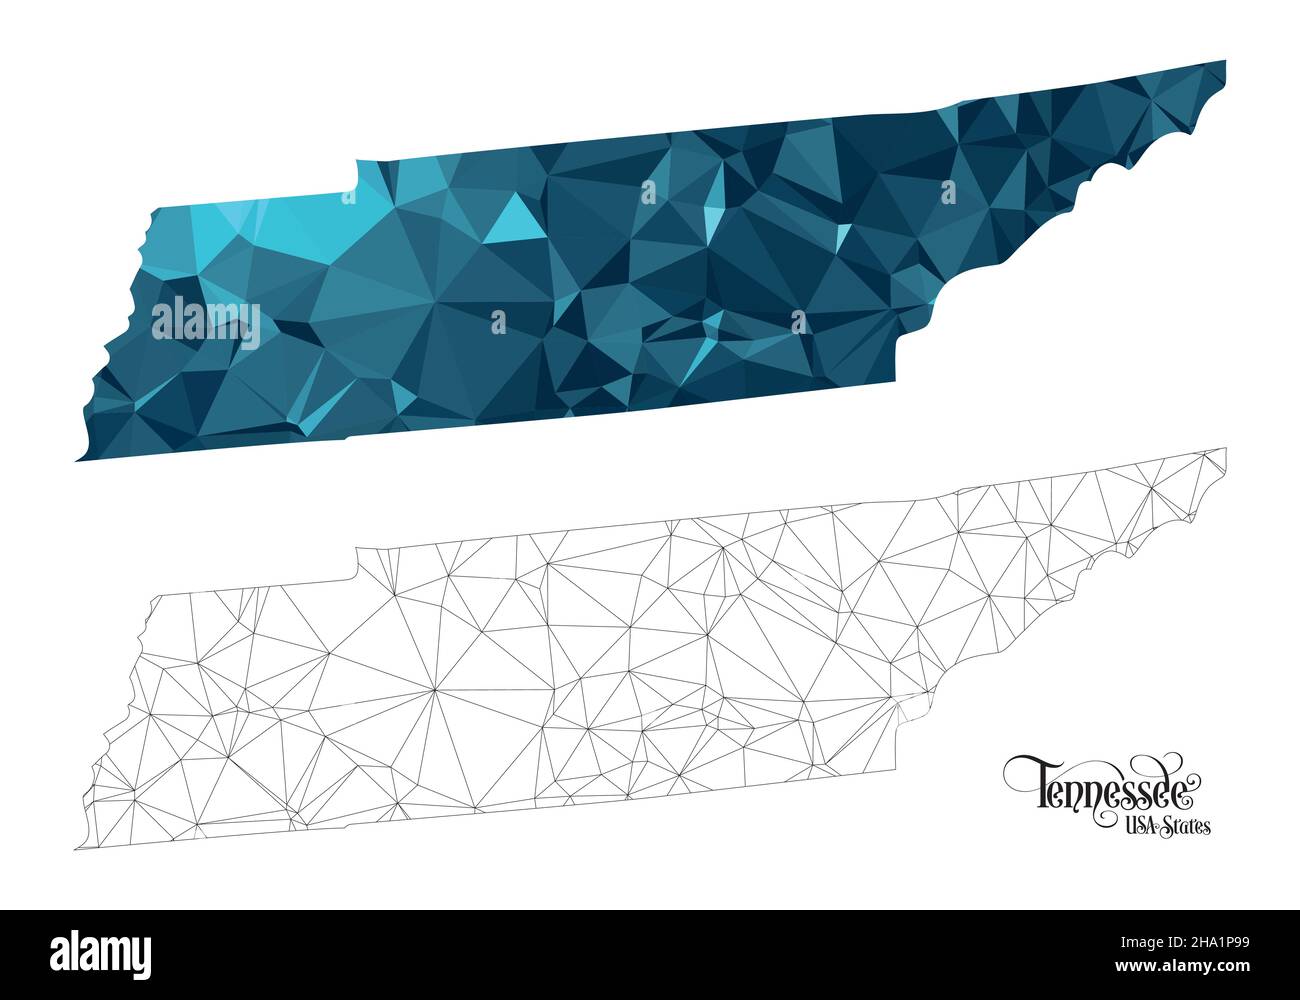 Low Poly Map of Tennessee State (USA). Polygonal Shape Vector Illustration on White Background. States of America Territory. Stock Vector